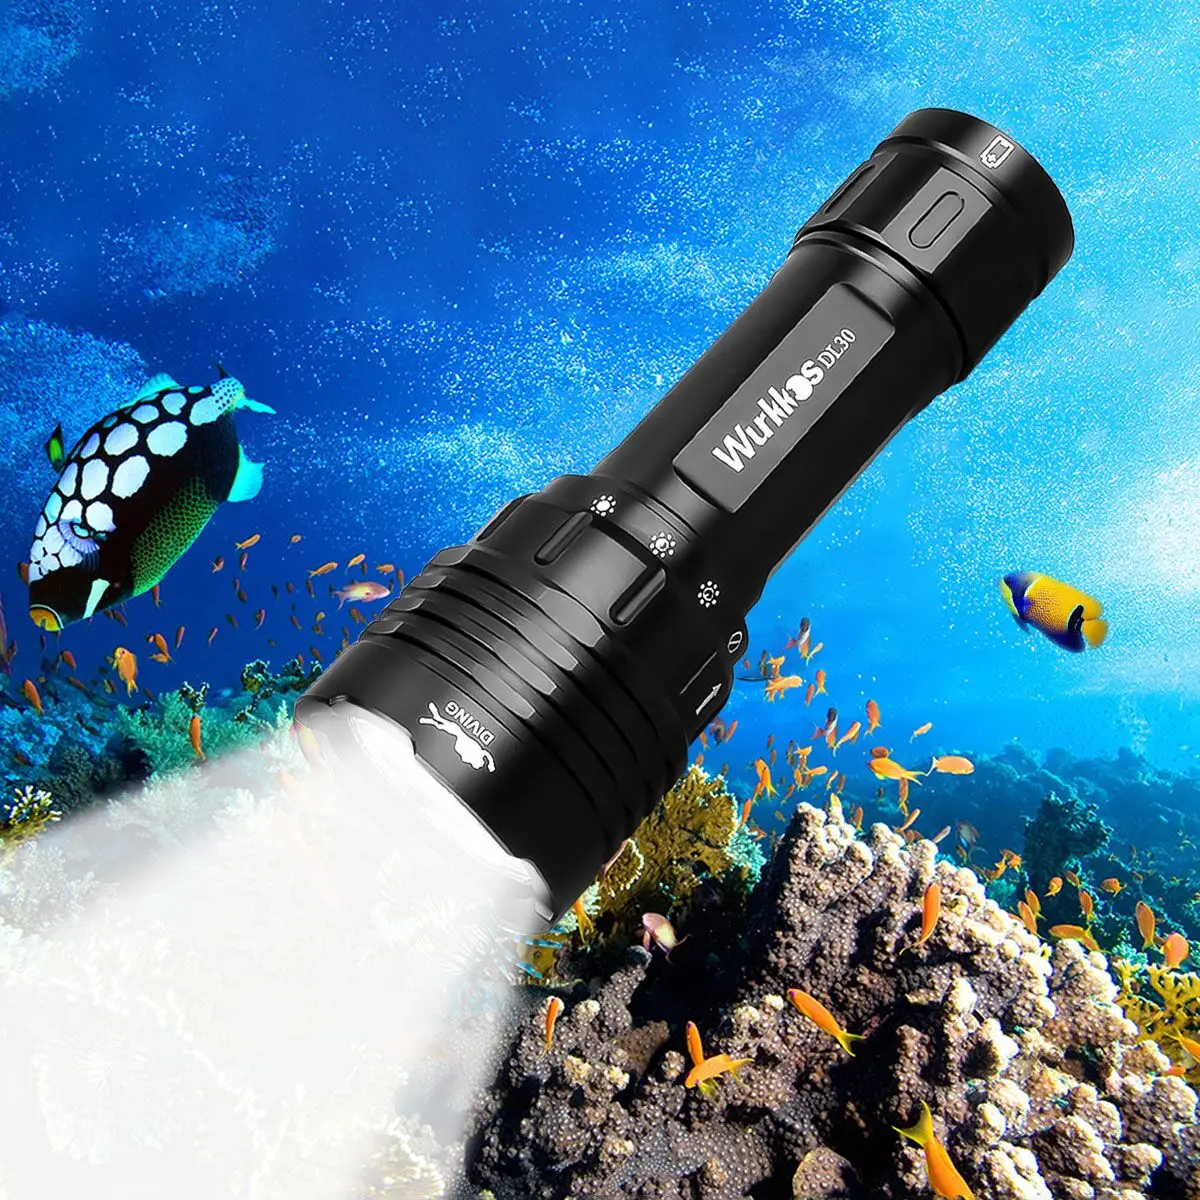 

DL30 Dive Light 21700 LED Flashlight Underwater Scuba Diving Torch 3600lm Triple LH351D High CRI Magnetic Control Ring Switch